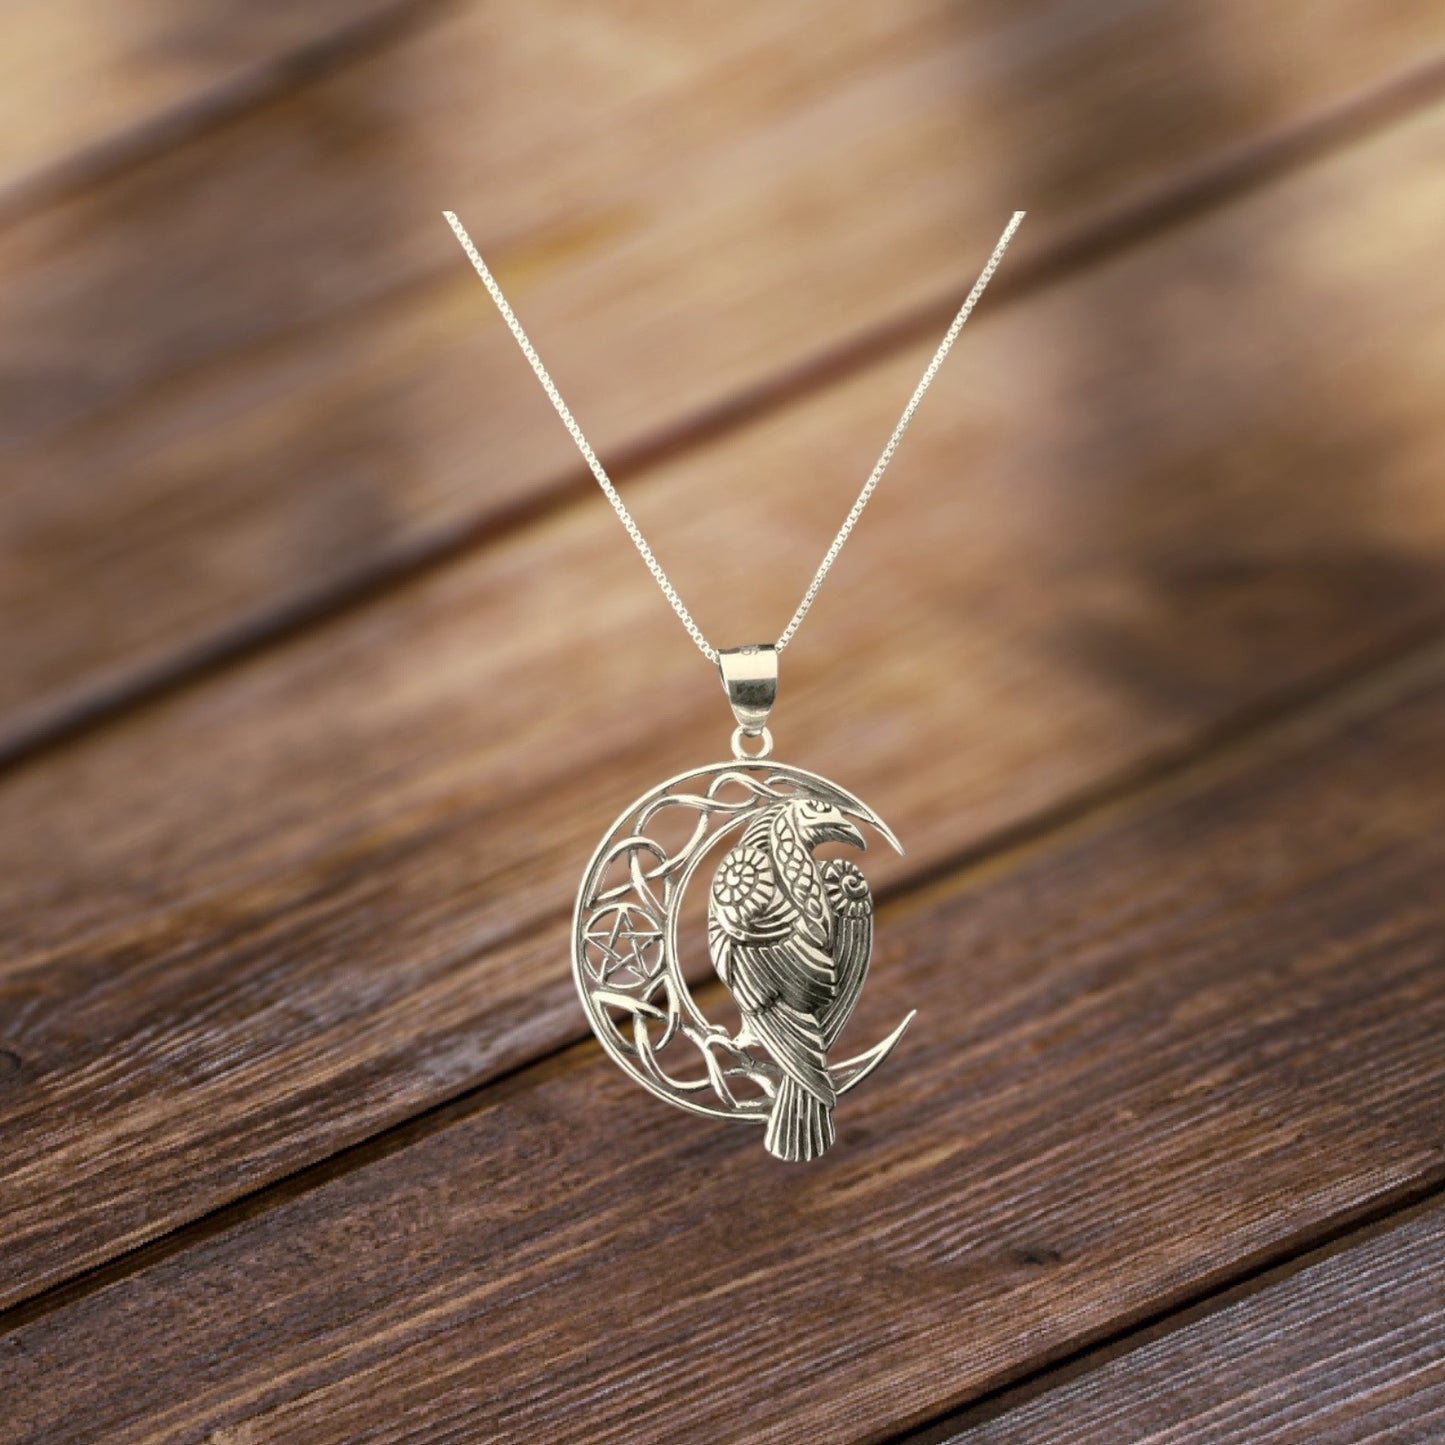 Handcast 925 Sterling Silver Raven Pendant on Crescent Moon accented with Celtic Knotwork + Free Chain